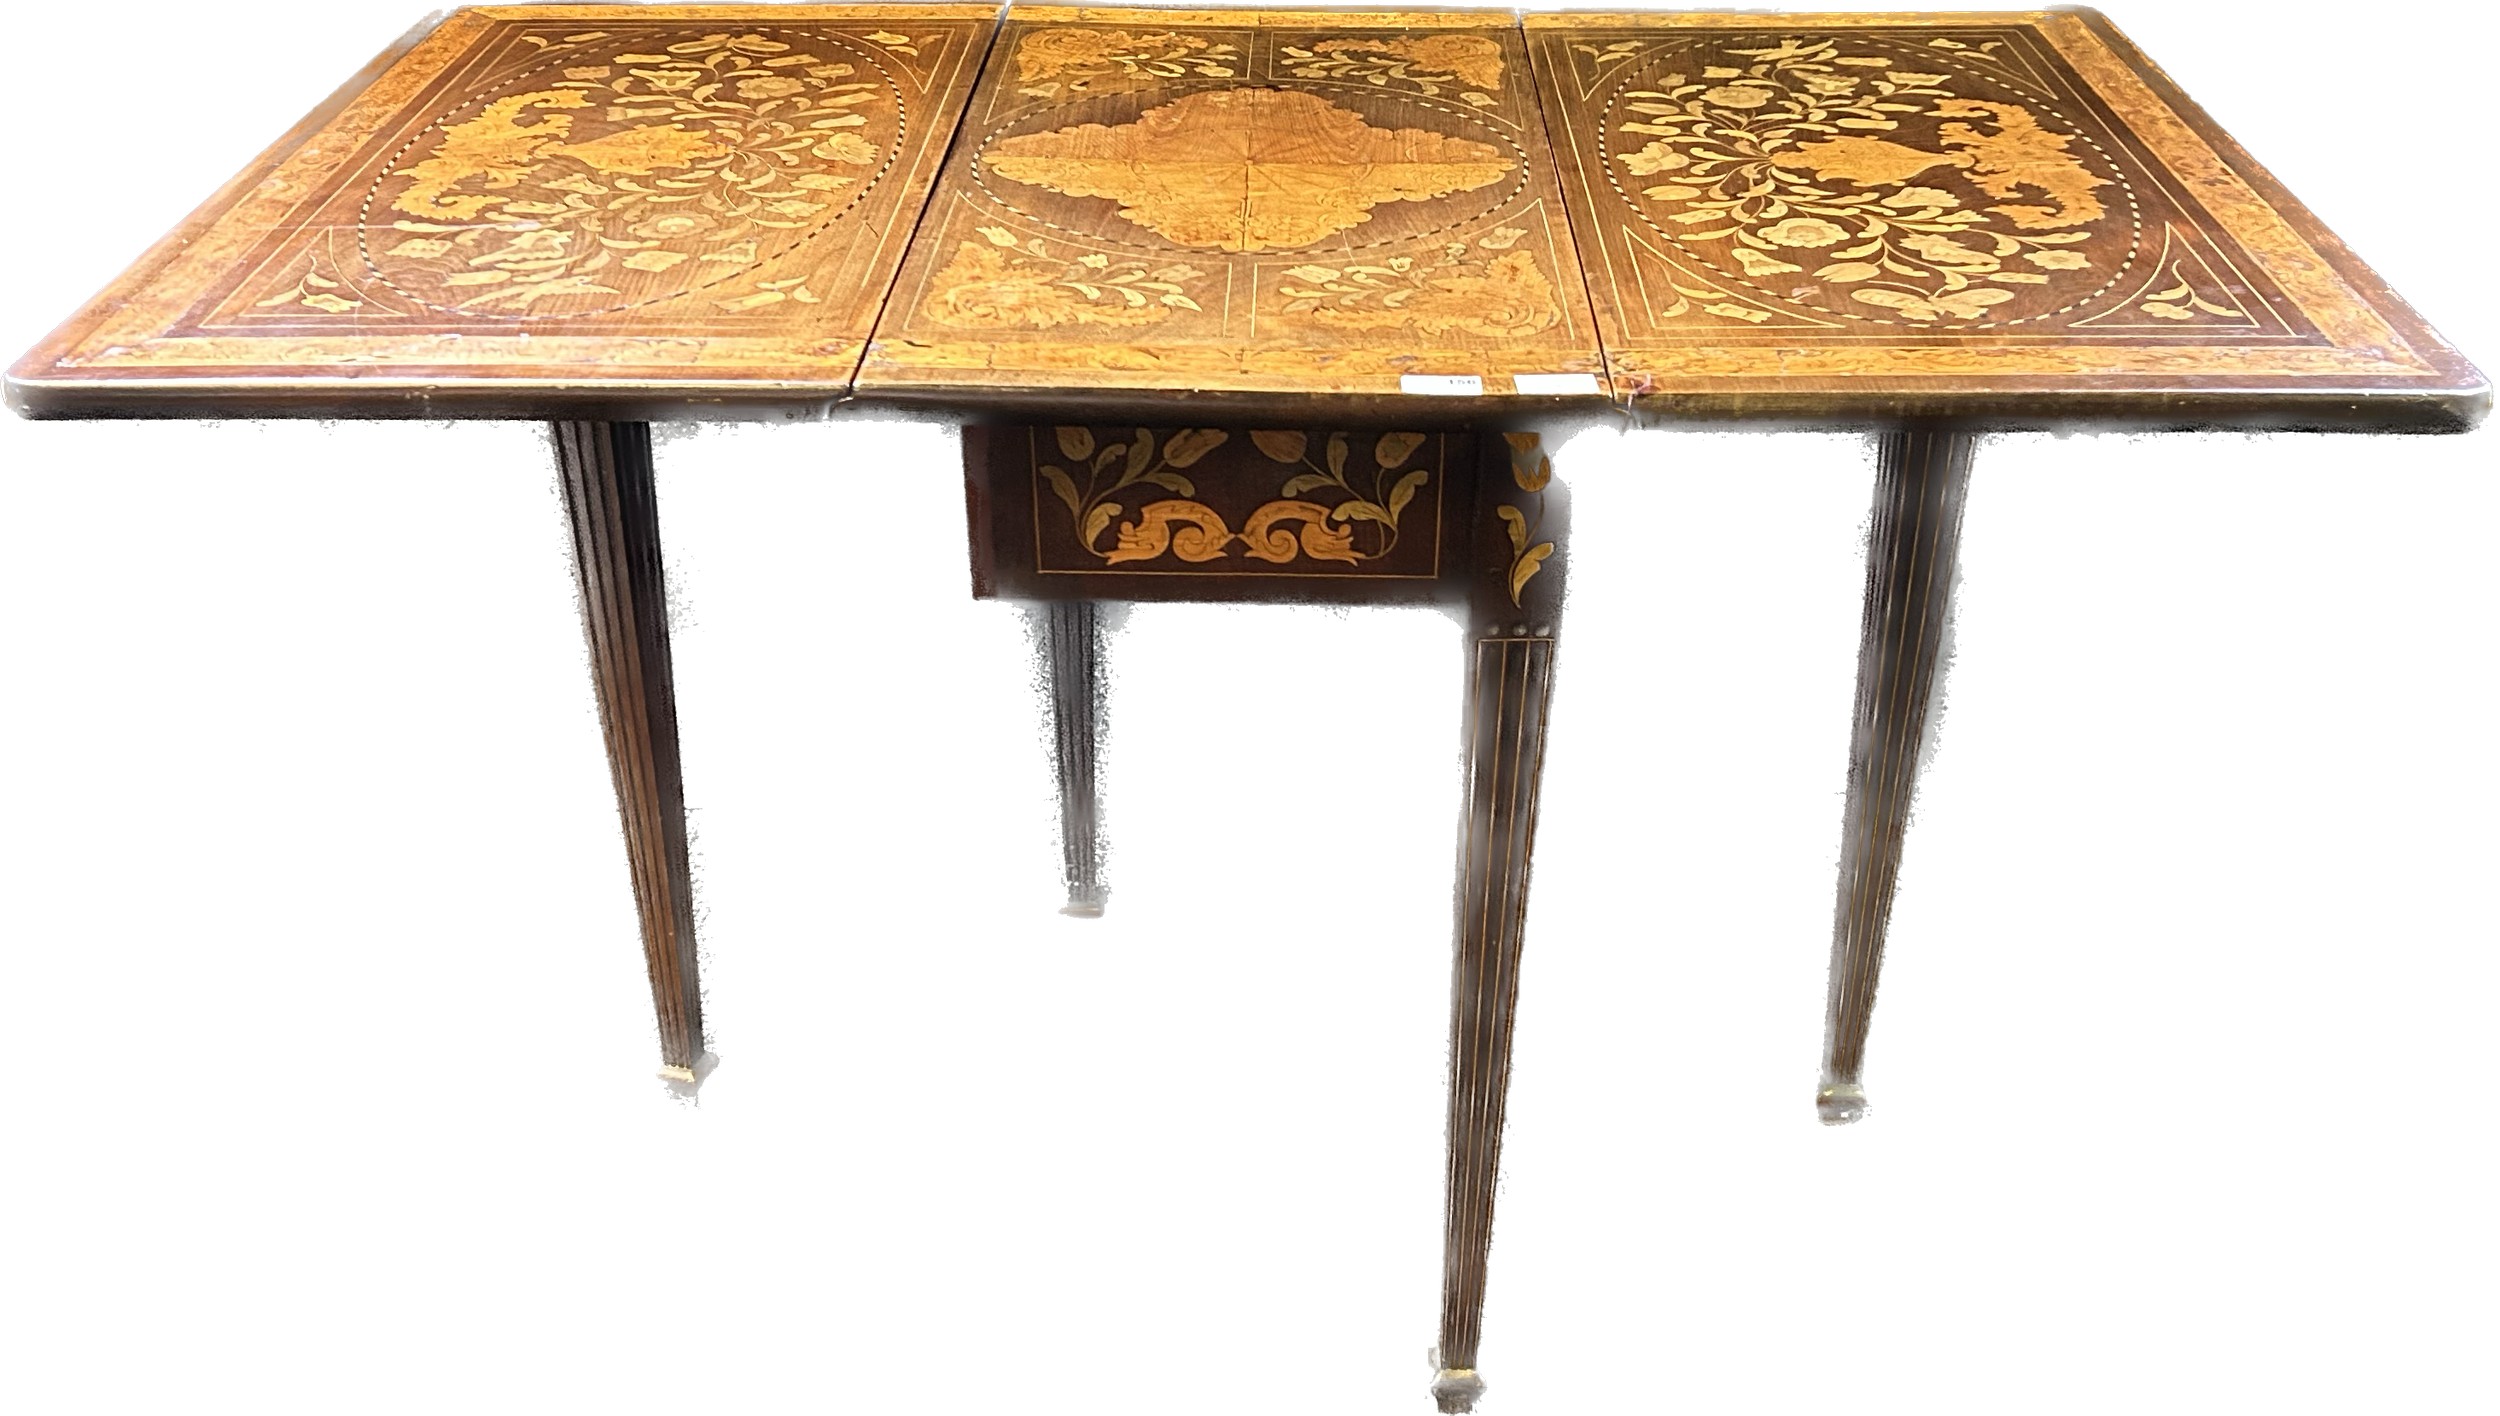 19th century Dutch table, the drop ends raising to a marquetry surface, the base with further - Image 7 of 8